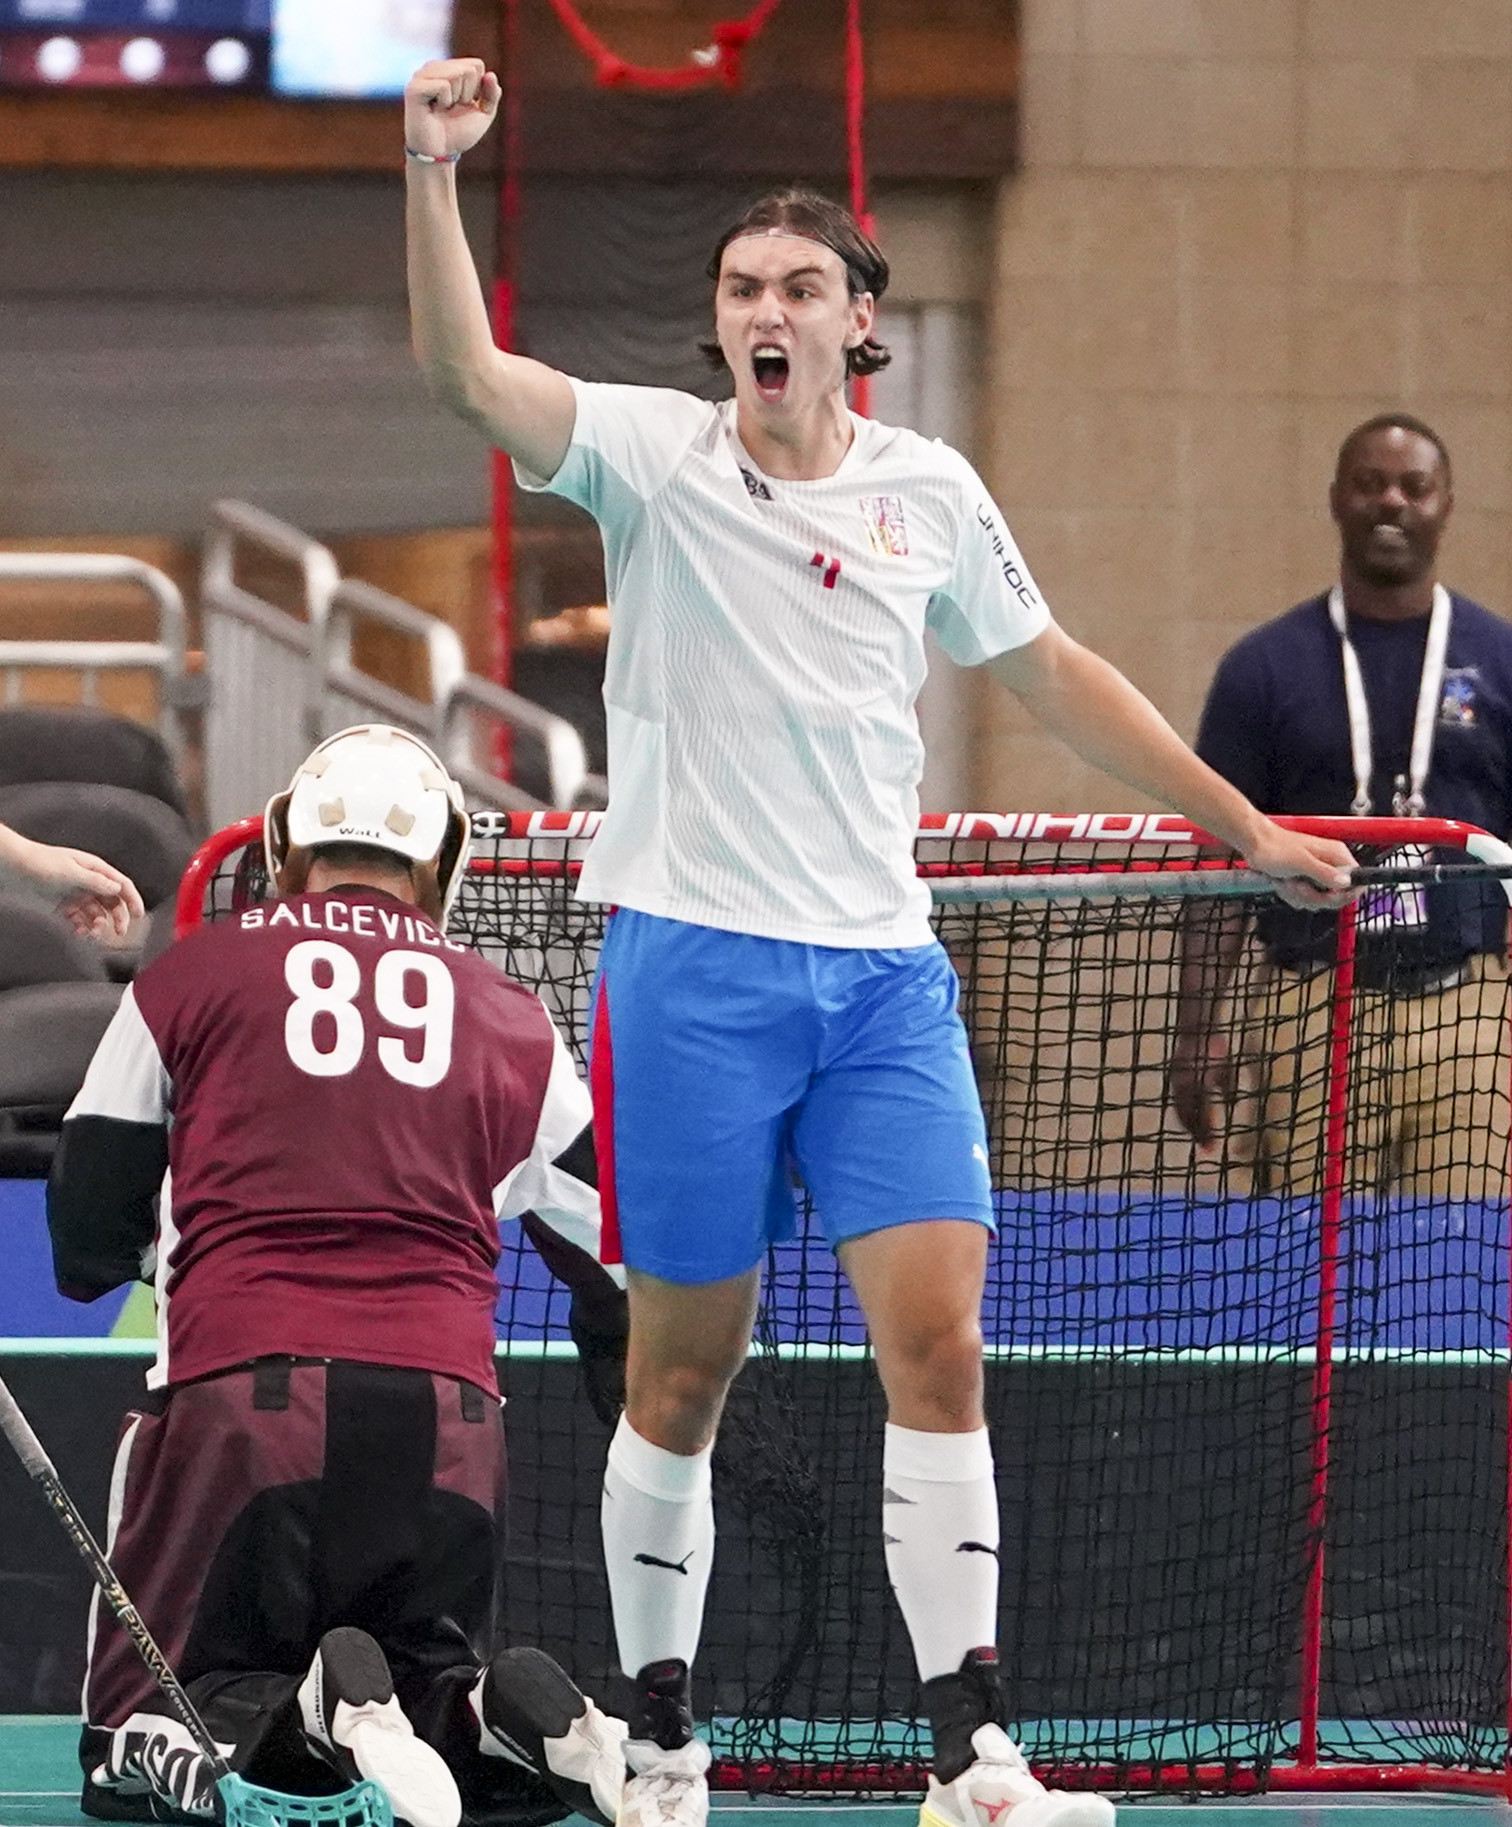 Adam Hemerka, centre, featured in the Czech Republic team which earned men's floorball bronze by beating Latvia 7-3 ©Marvin Gentry/The World Games 2022